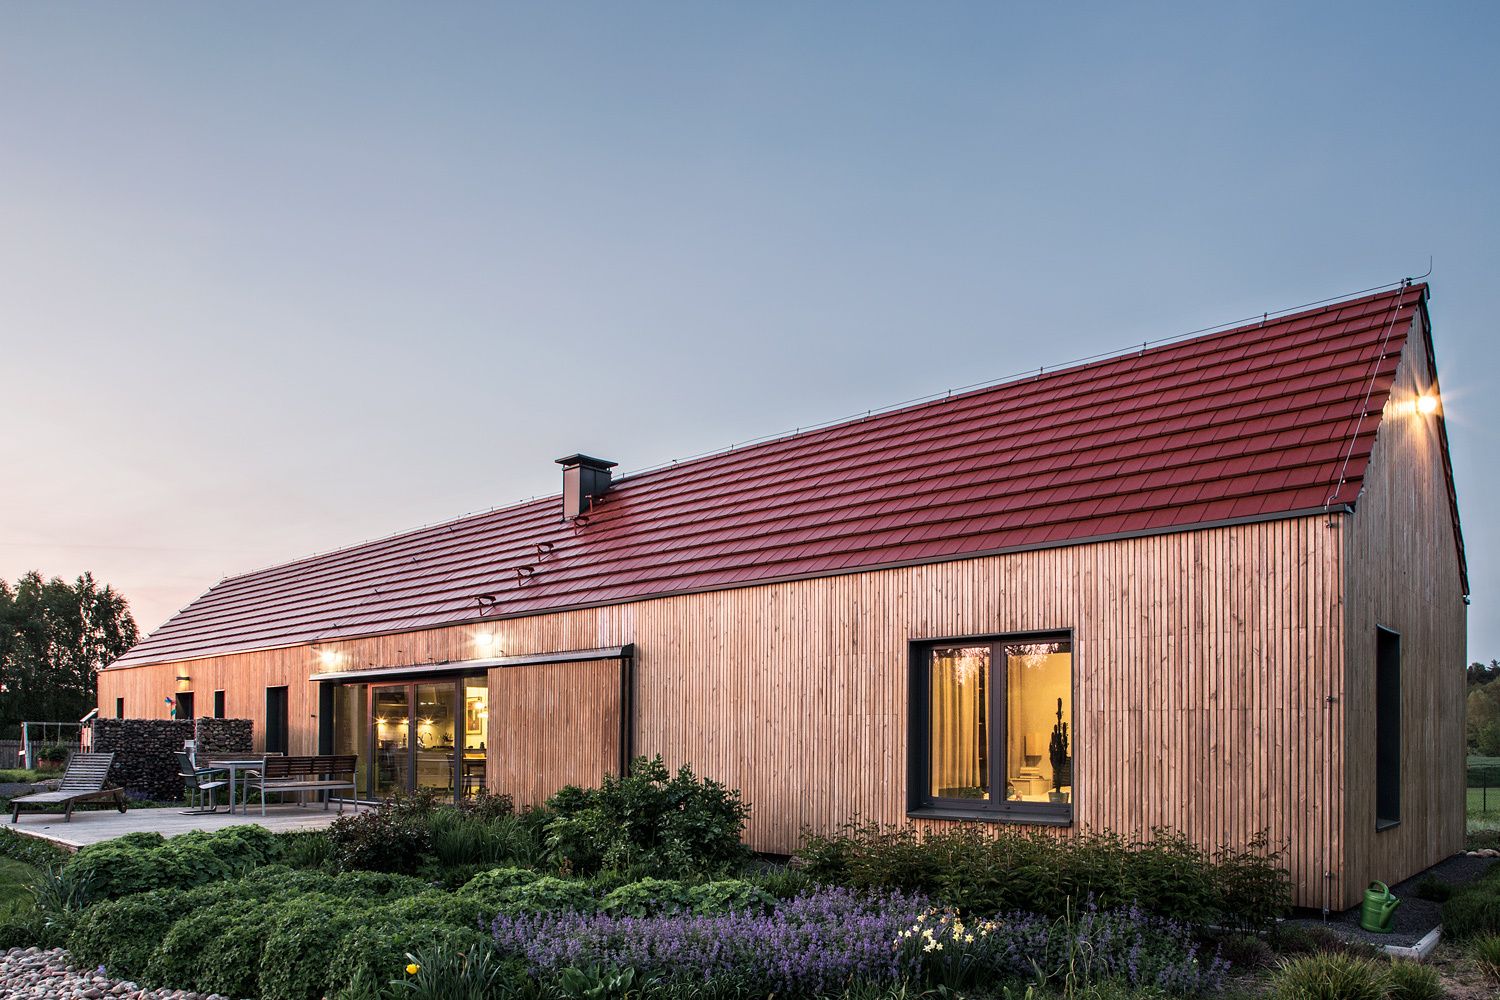 Ceramic red tile and vertically arranged pine boards give the modern home a traditional exterior